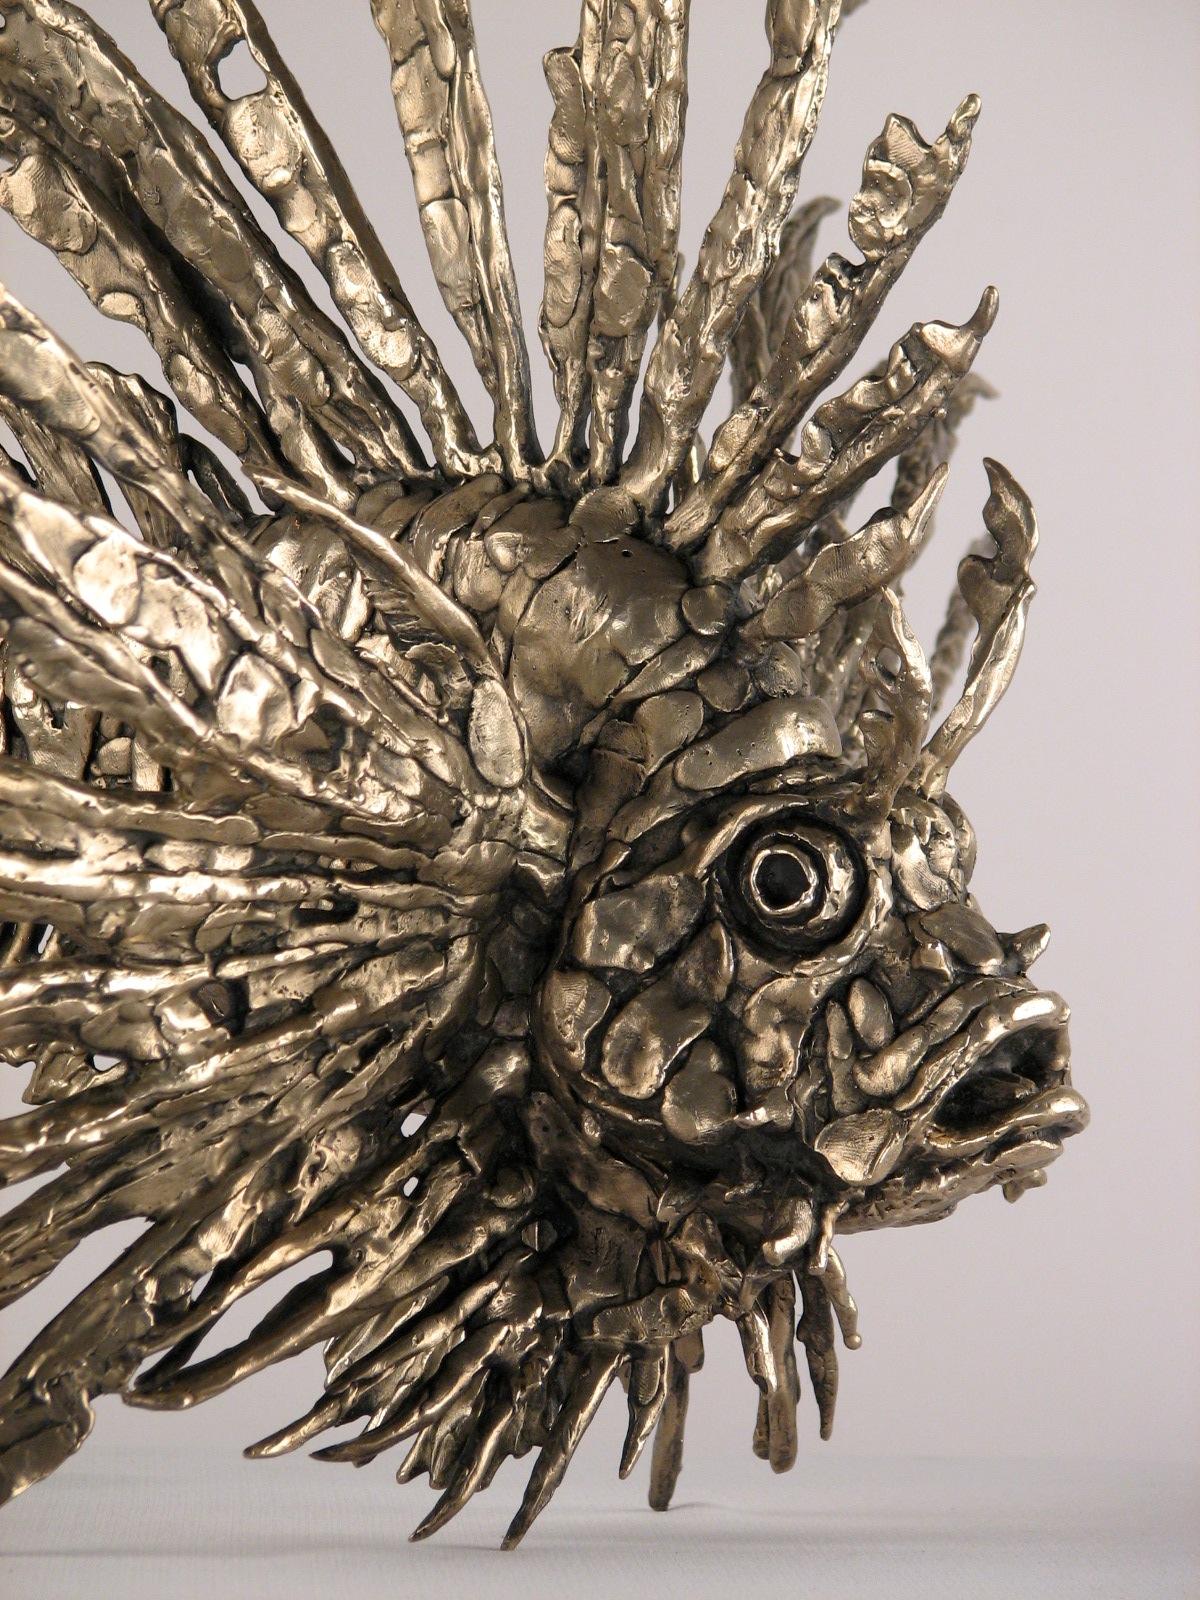 Angel Fish bronze sculpture, Limited Edition of/12 signed , Table top. The many pieces of bronze branching off from the body of the fish make this sculpture extremely interesting and complex. 

Andrzej graduated with an MA degree in Fine Arts in the